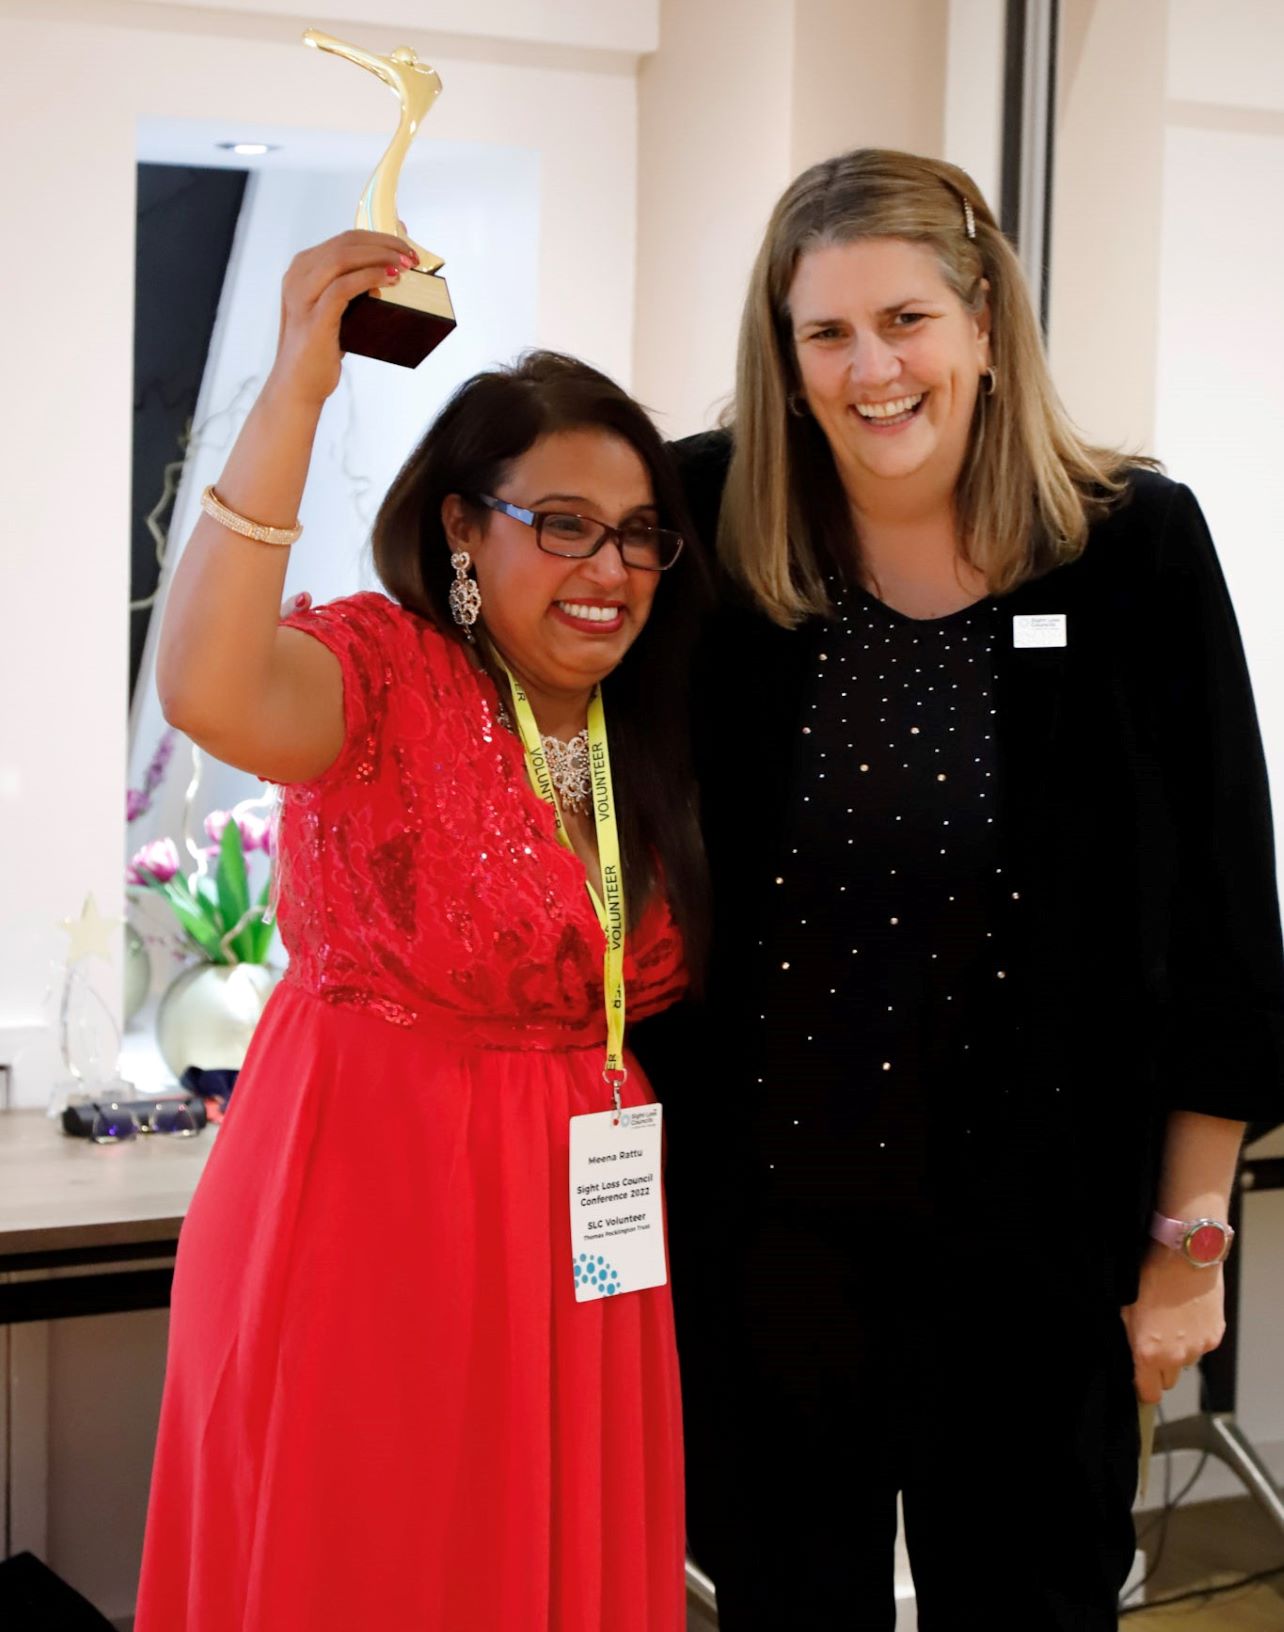 Meena Ratu, Black Country SLC, with Emma Hughes, Director of Services. Meena is holding her award above her head.